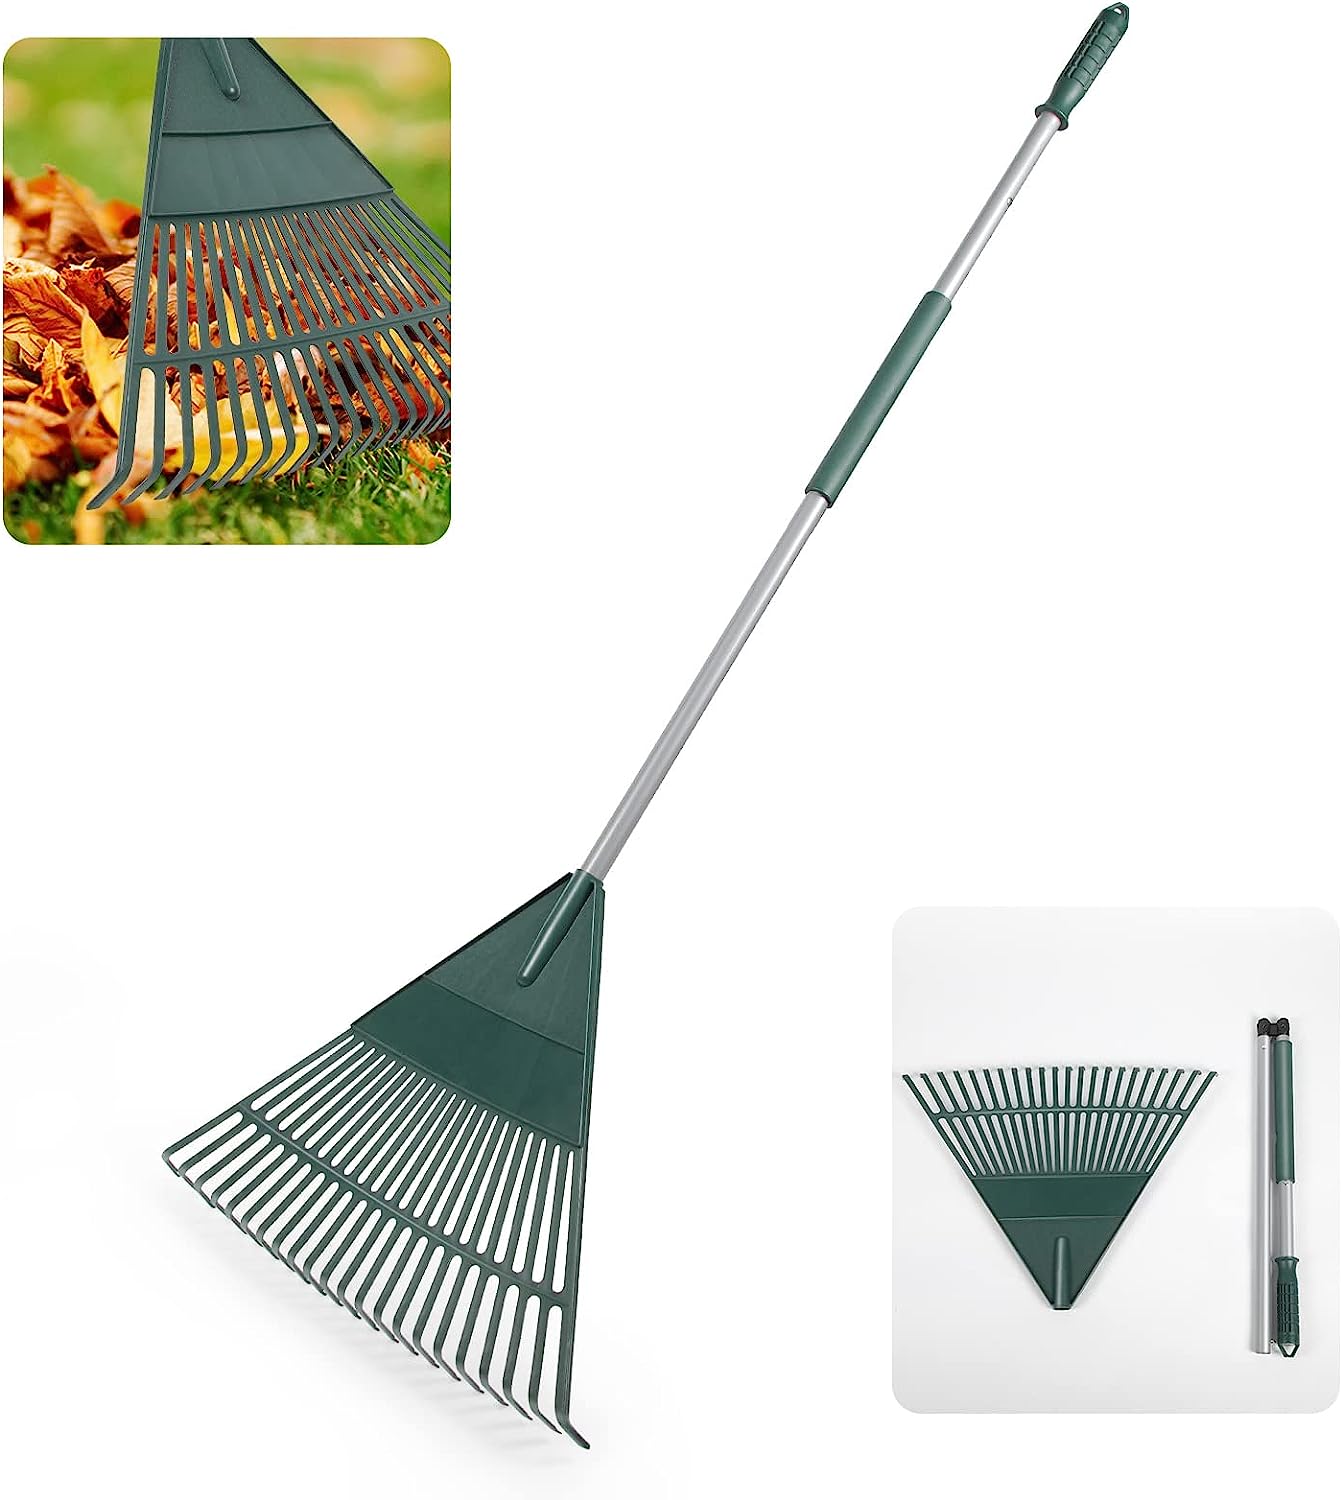 22Tines Foldable Garden Rake, 60” Durable and Strong [...]